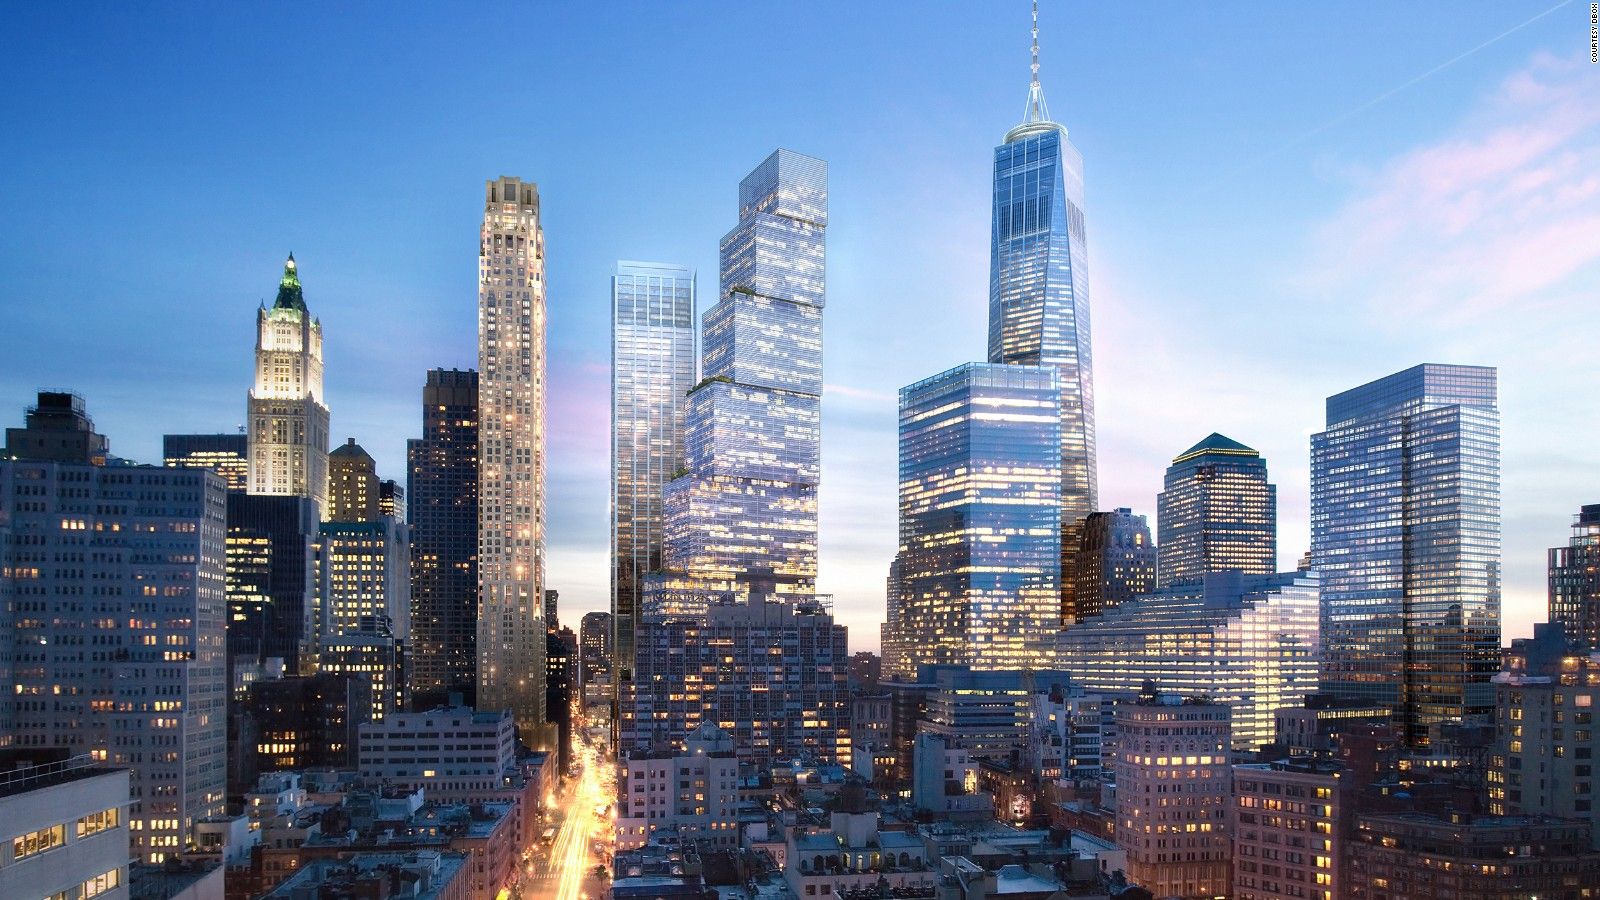 New World Trade Center tower unveiled